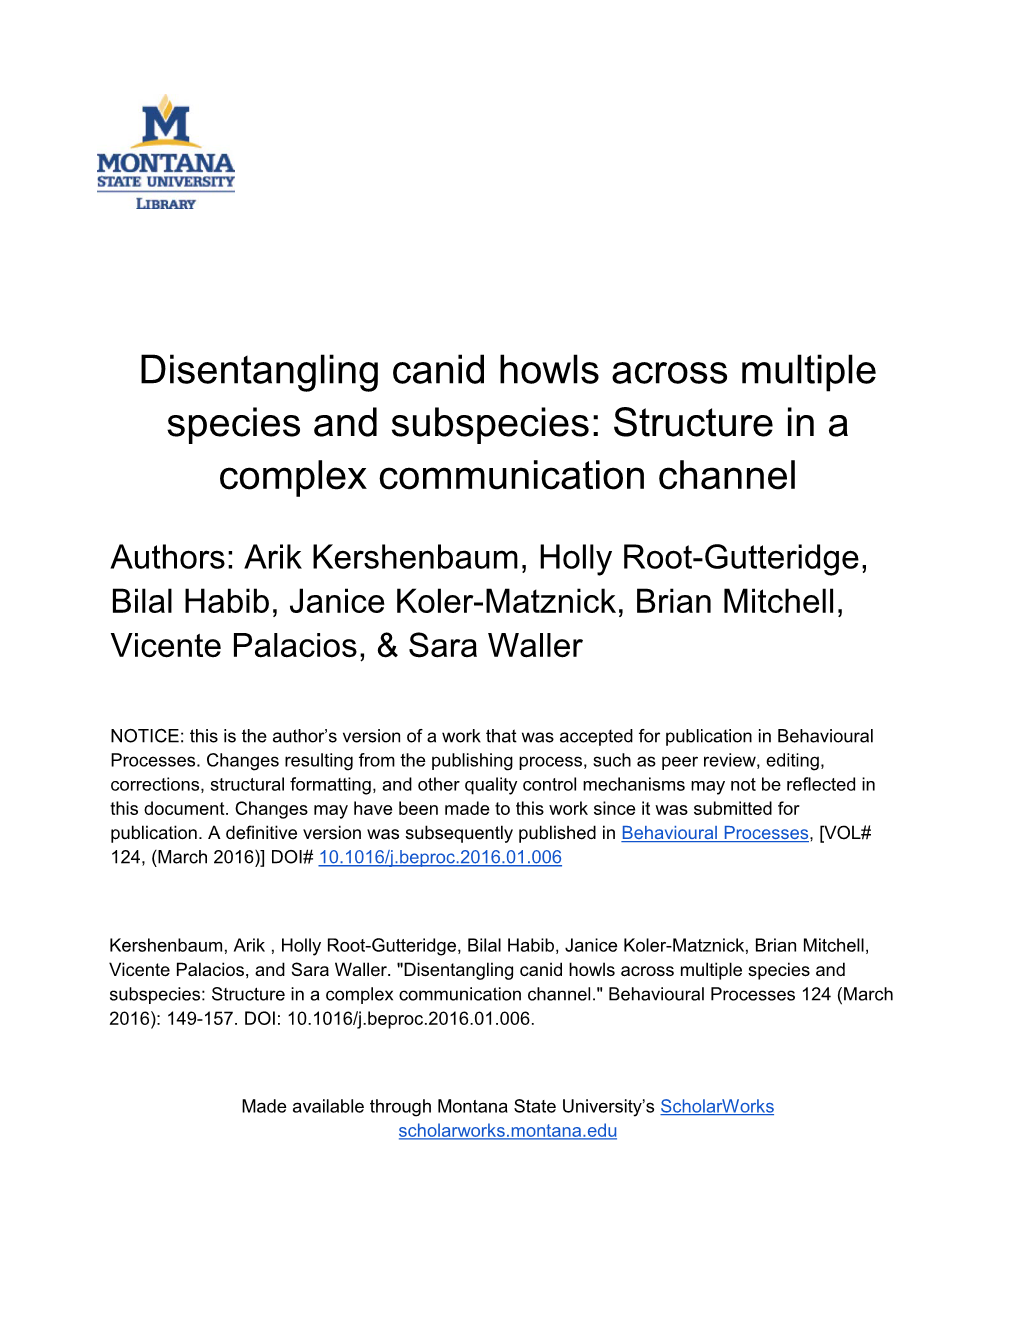 Disentangling Canid Howls Across Multiple Species and Subspecies: Structure in a Complex Communication Channel